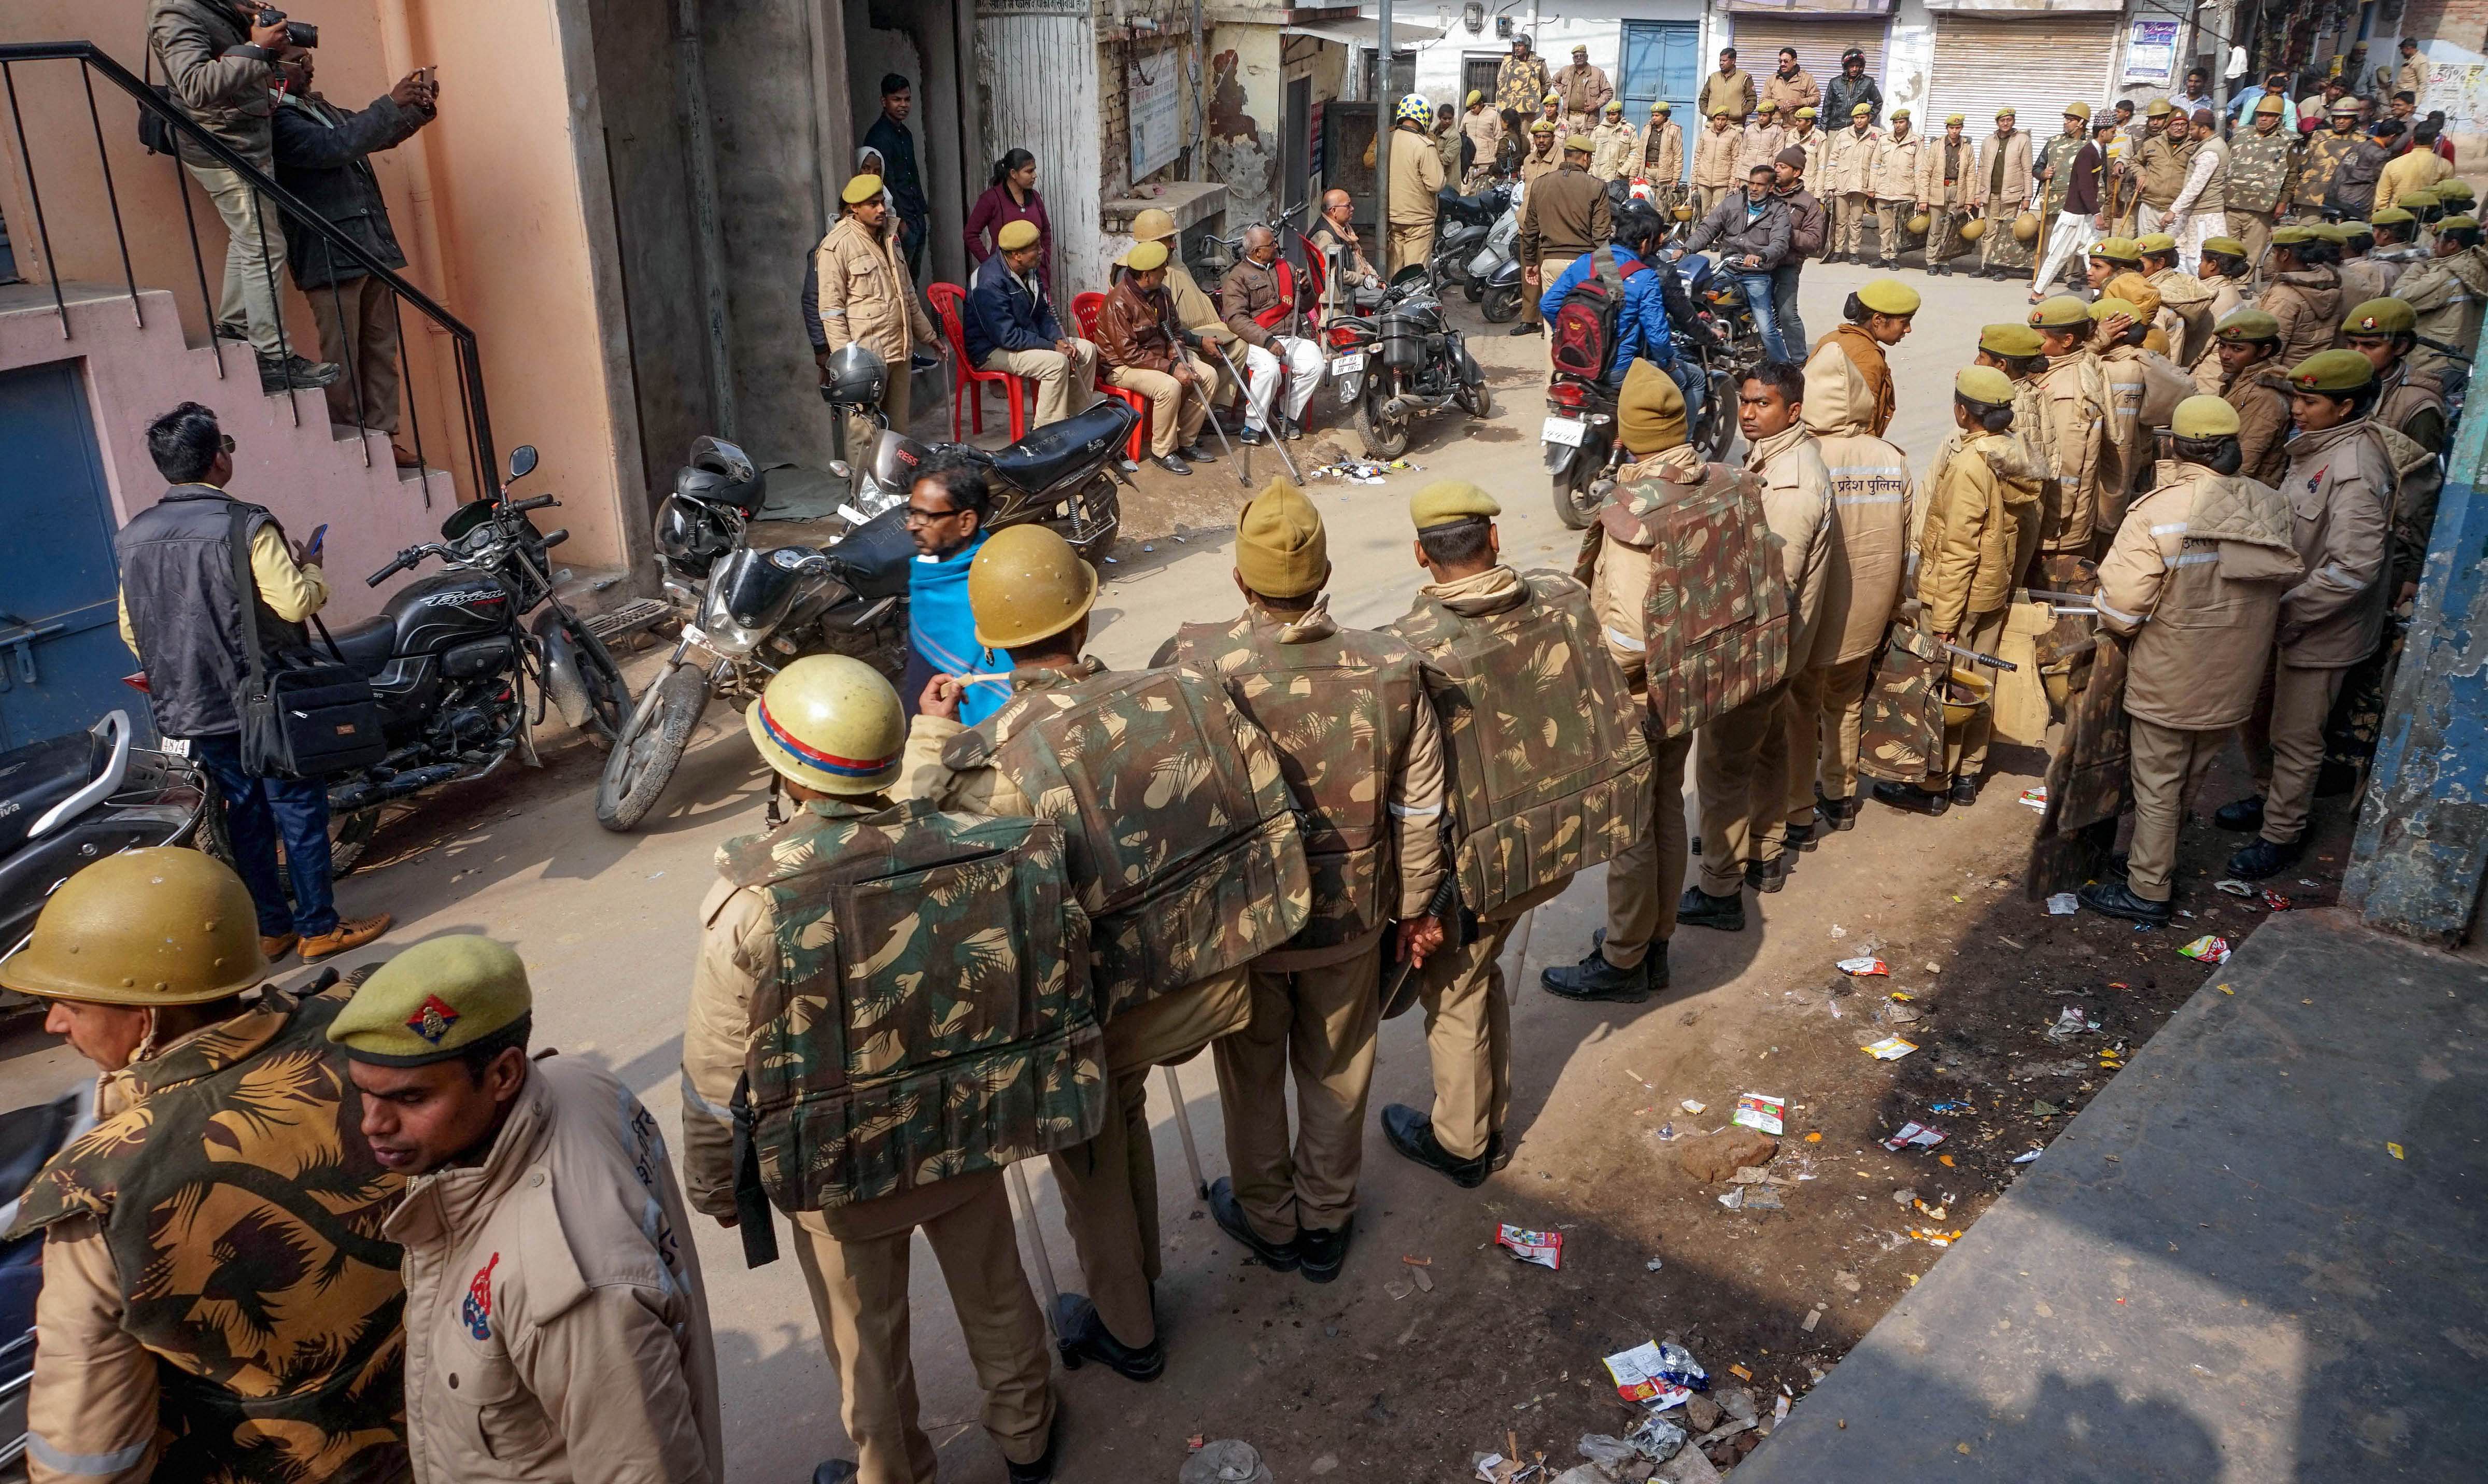  Police personnel guard a street during protests against Citizenship Amendment Act (CAA) in Varanasi. (PTI Photo)